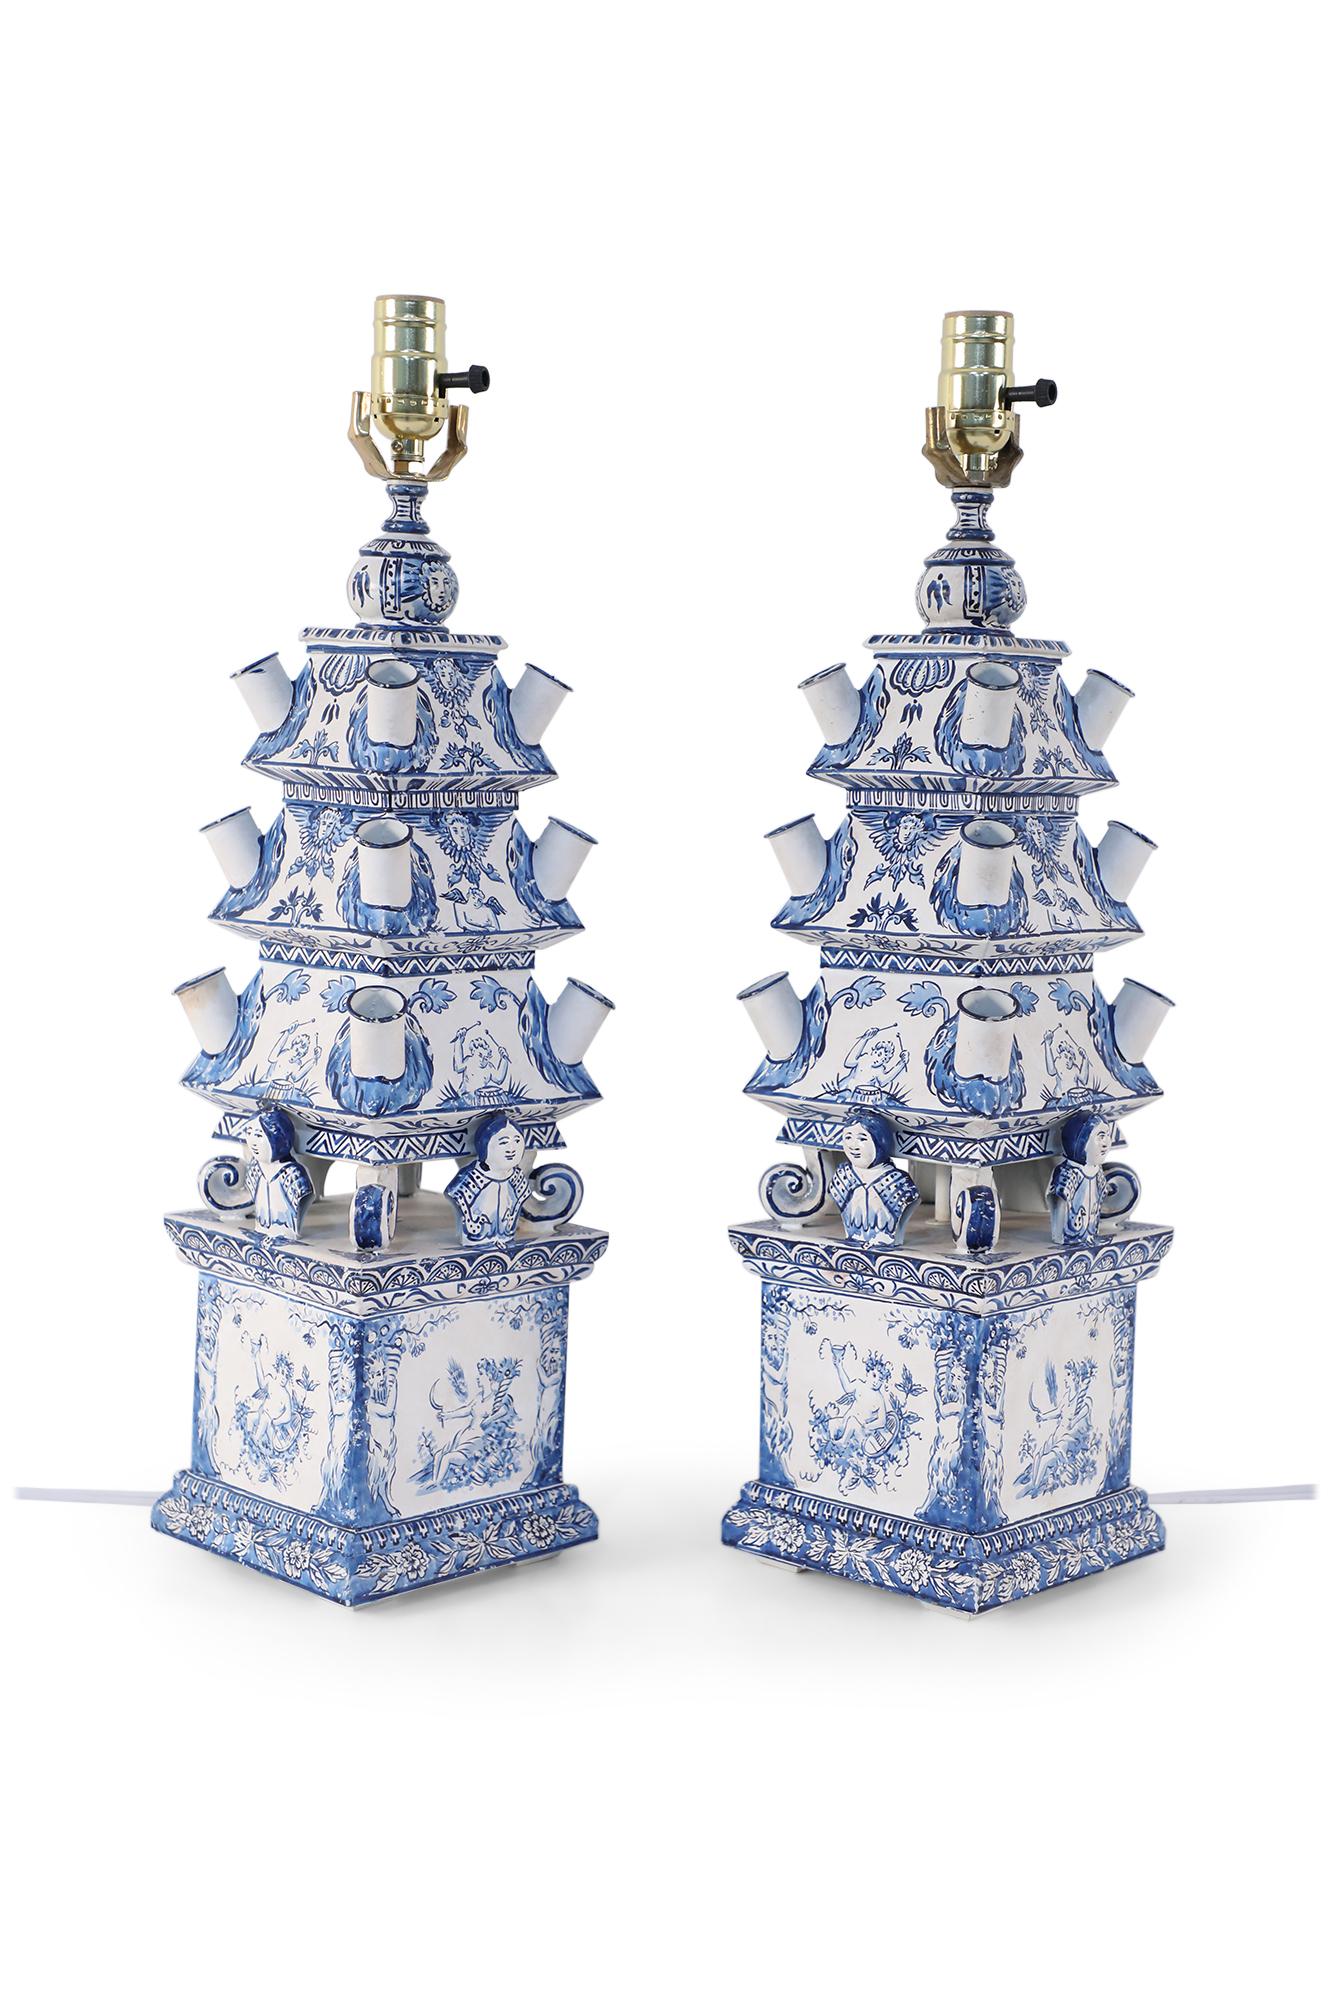 Pair of vintage blue and white tole table lamps created from a tiered tulipiere with designs depicting florals, cherubs, and a dimensional bust of a woman on all four sides, mounted with brass hardware.